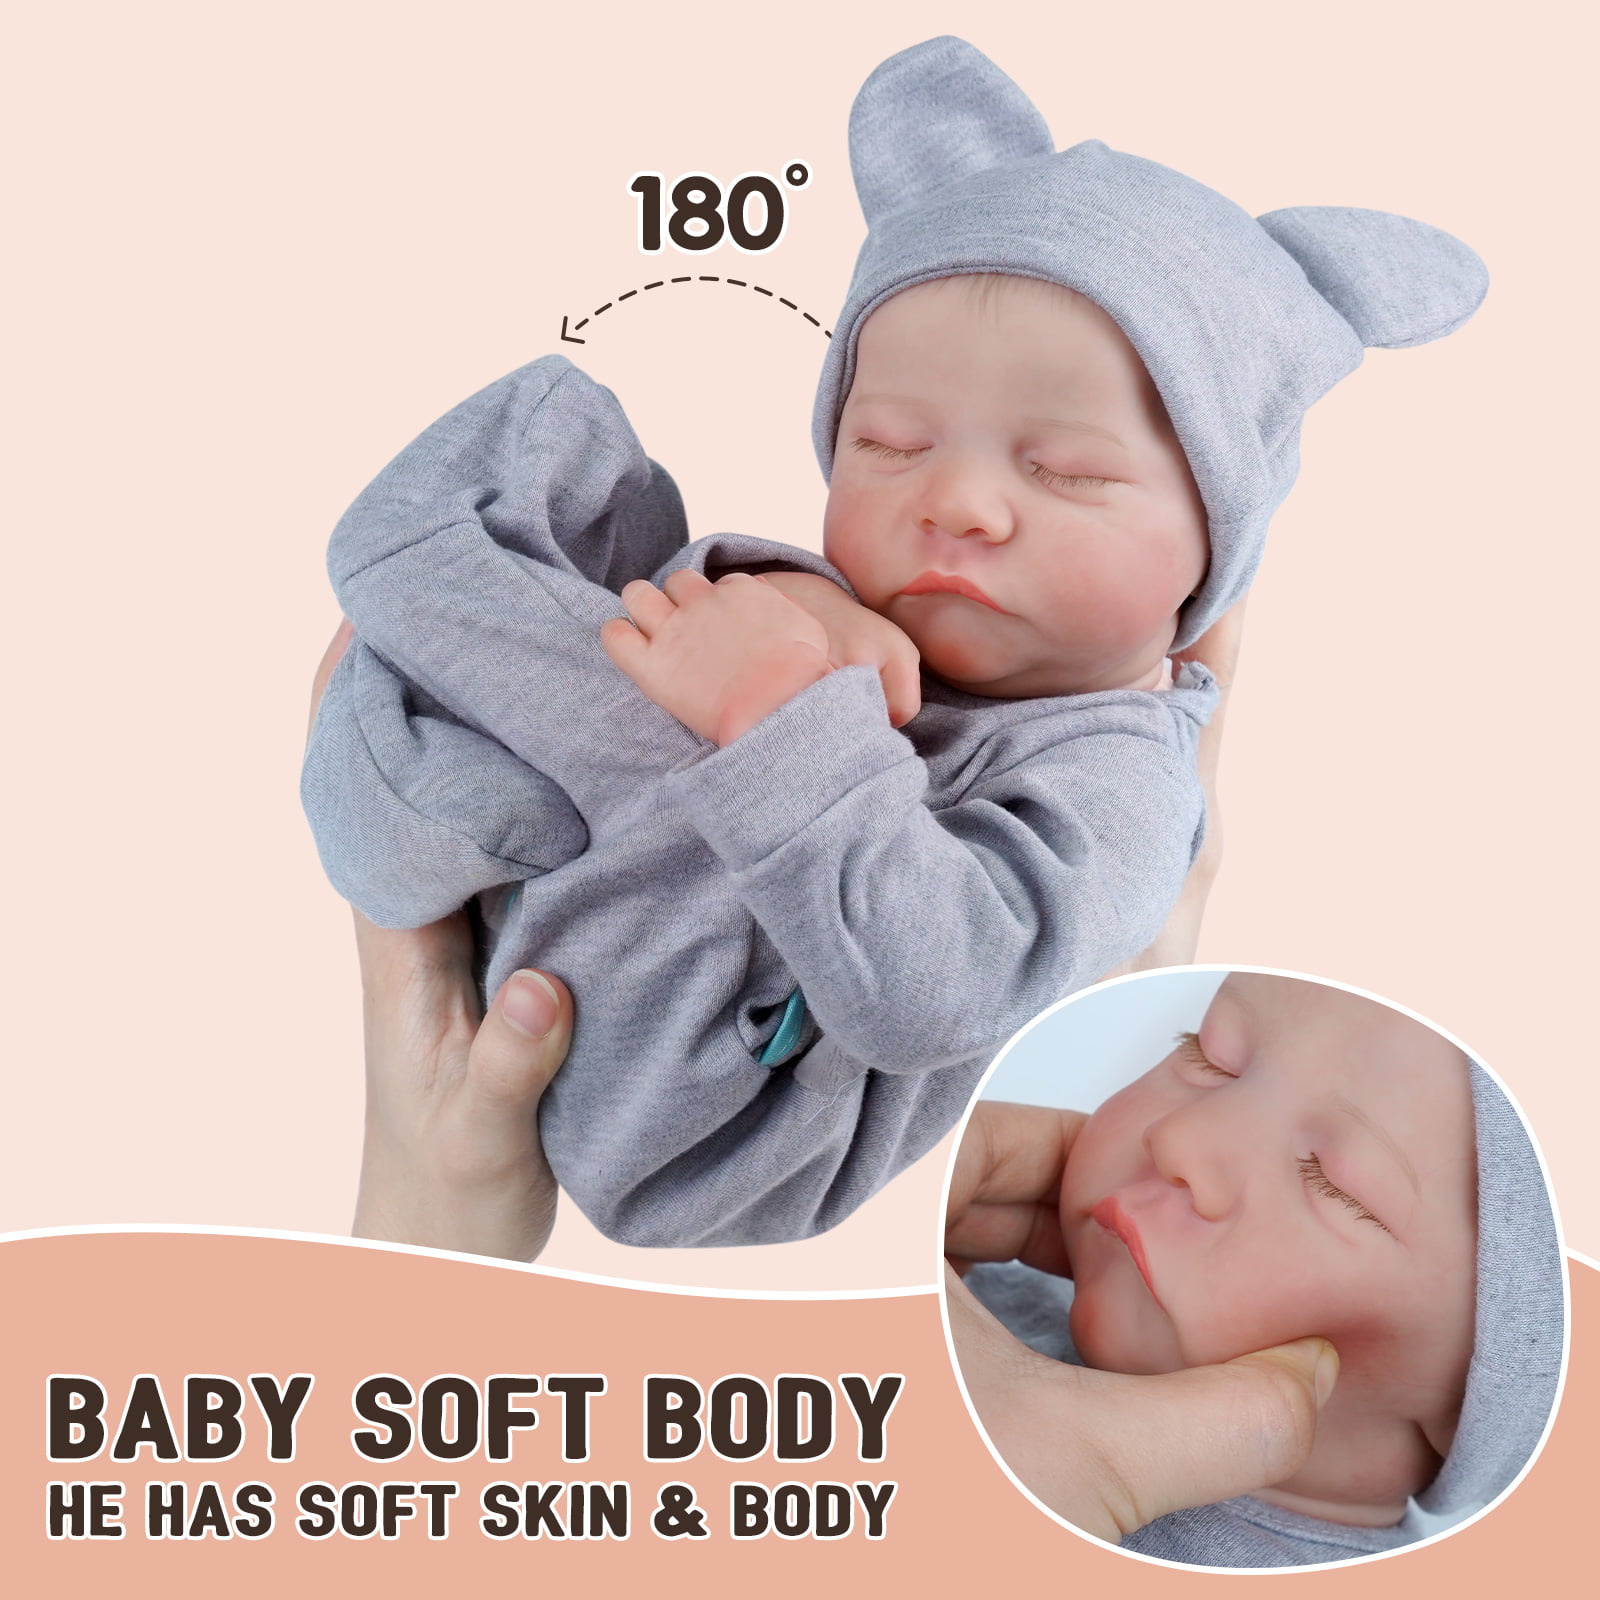 Lifelike Reborn Baby Dolls - 17 inches Realistic Newborn Baby Dolls Real  Life Baby Dolls Soft Cloth Body Baby Boy with Feeding Kit Gift Box for Kids